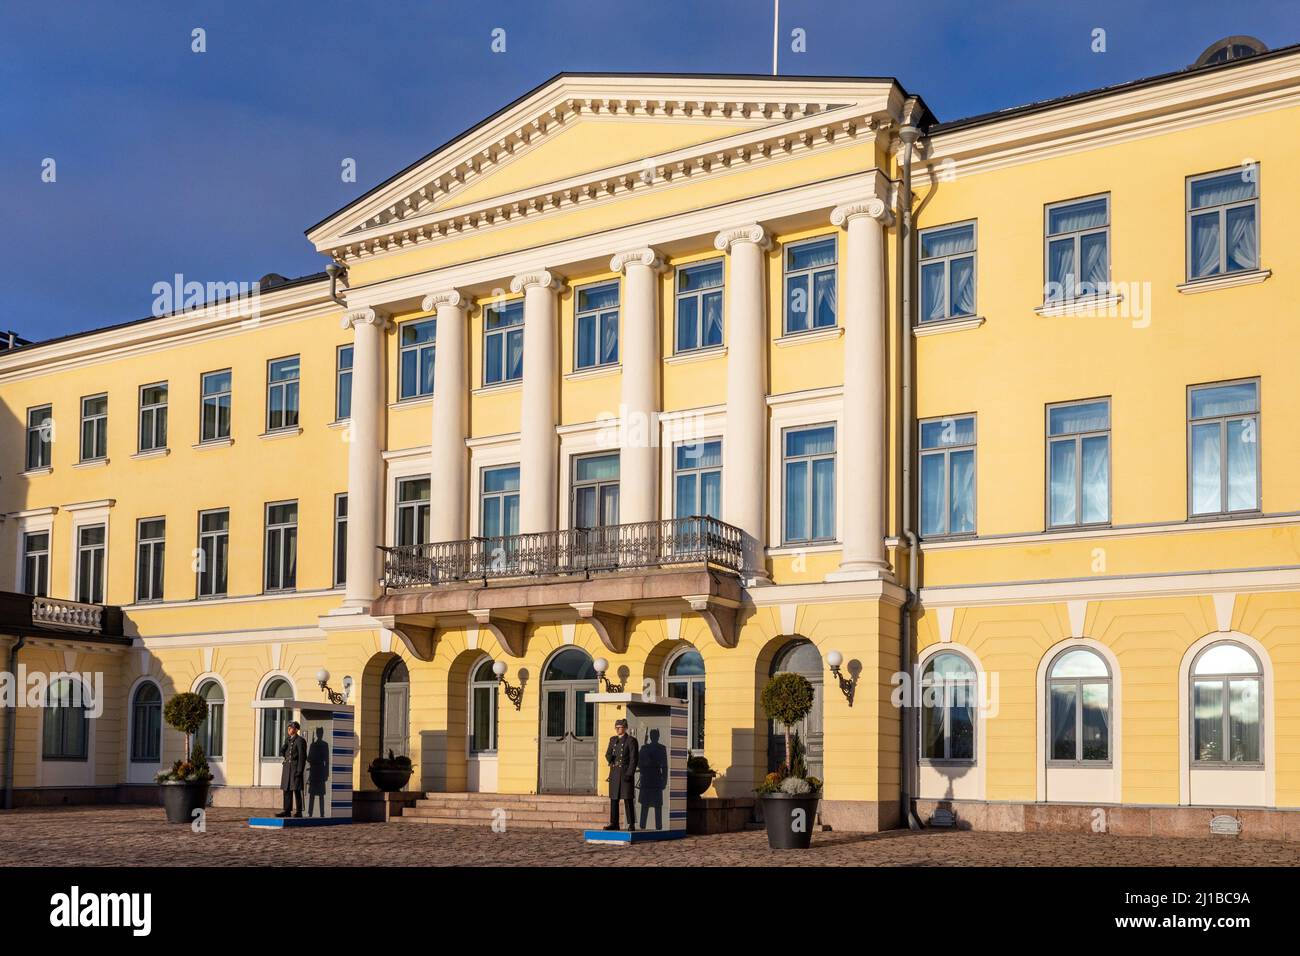 REPUBLICAN GUARDS IN FRONT OF THE FACADE OF THE PRESIDENTIAL PALACE, HELSINKI, FINLAND, EUROPE Stock Photo